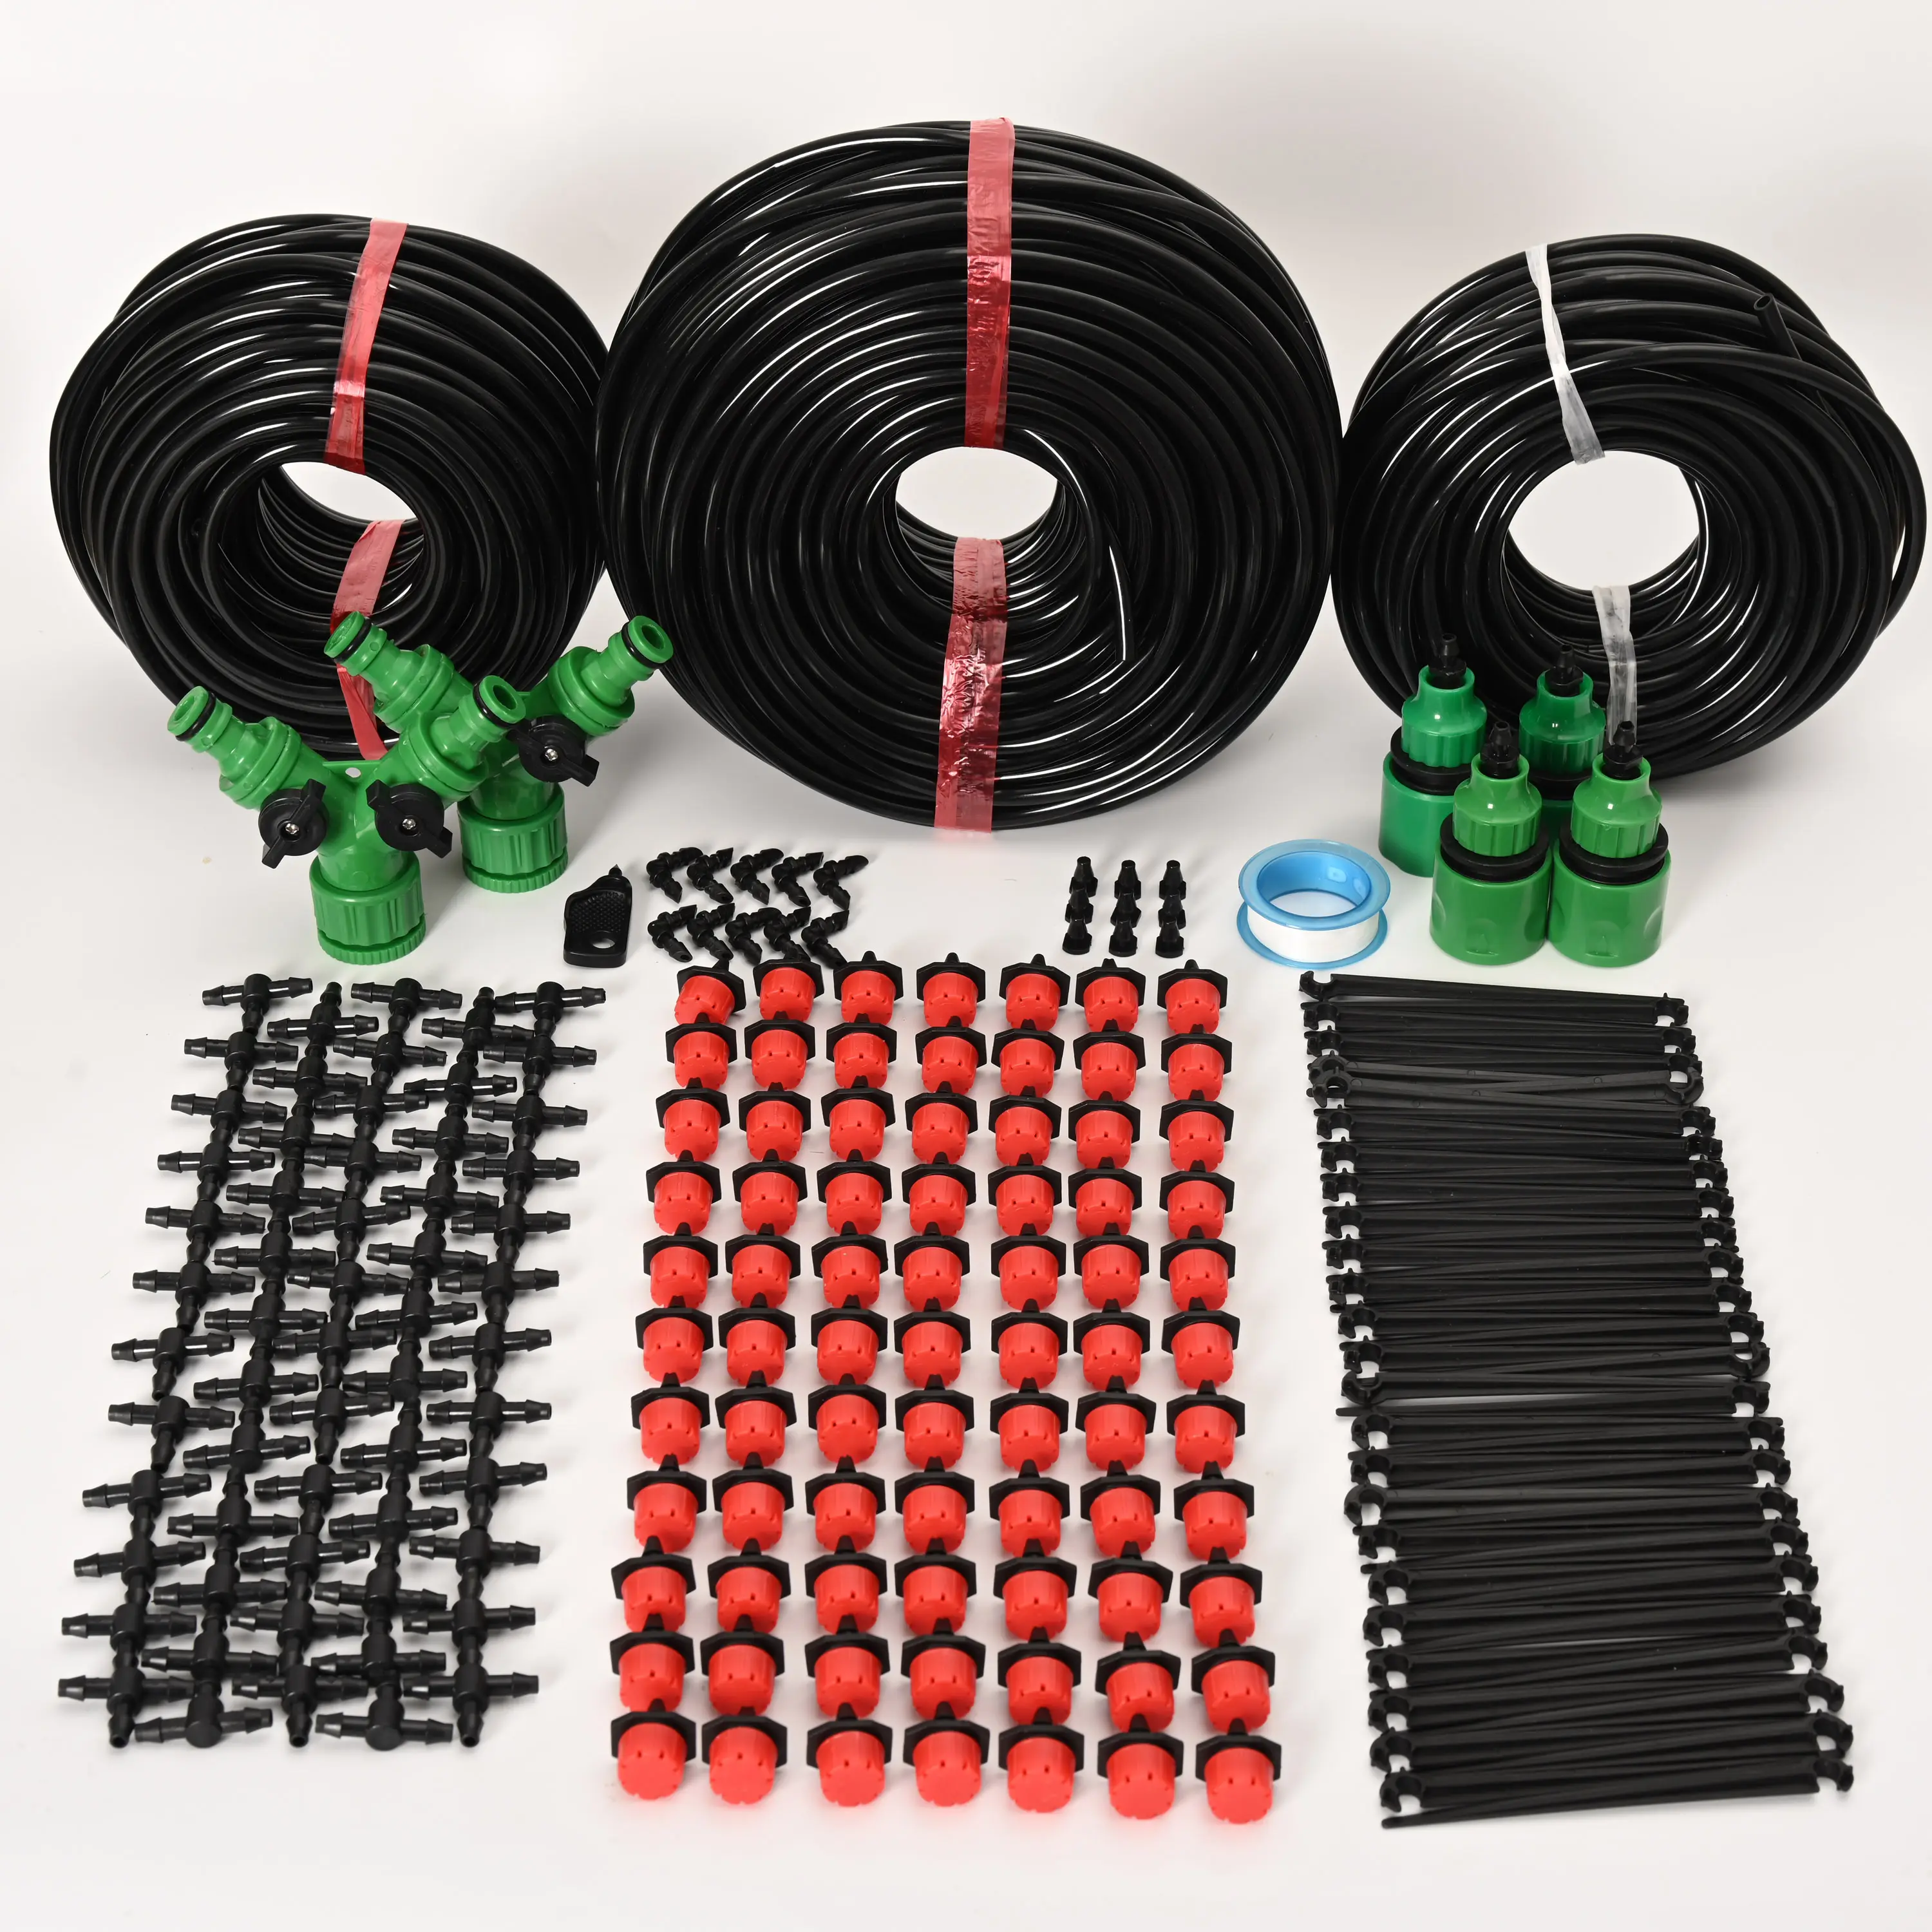 Drip Irrigation System Garden Watering Set Watering Kits Adjustable Dripper for Irrigation Micro Watering System